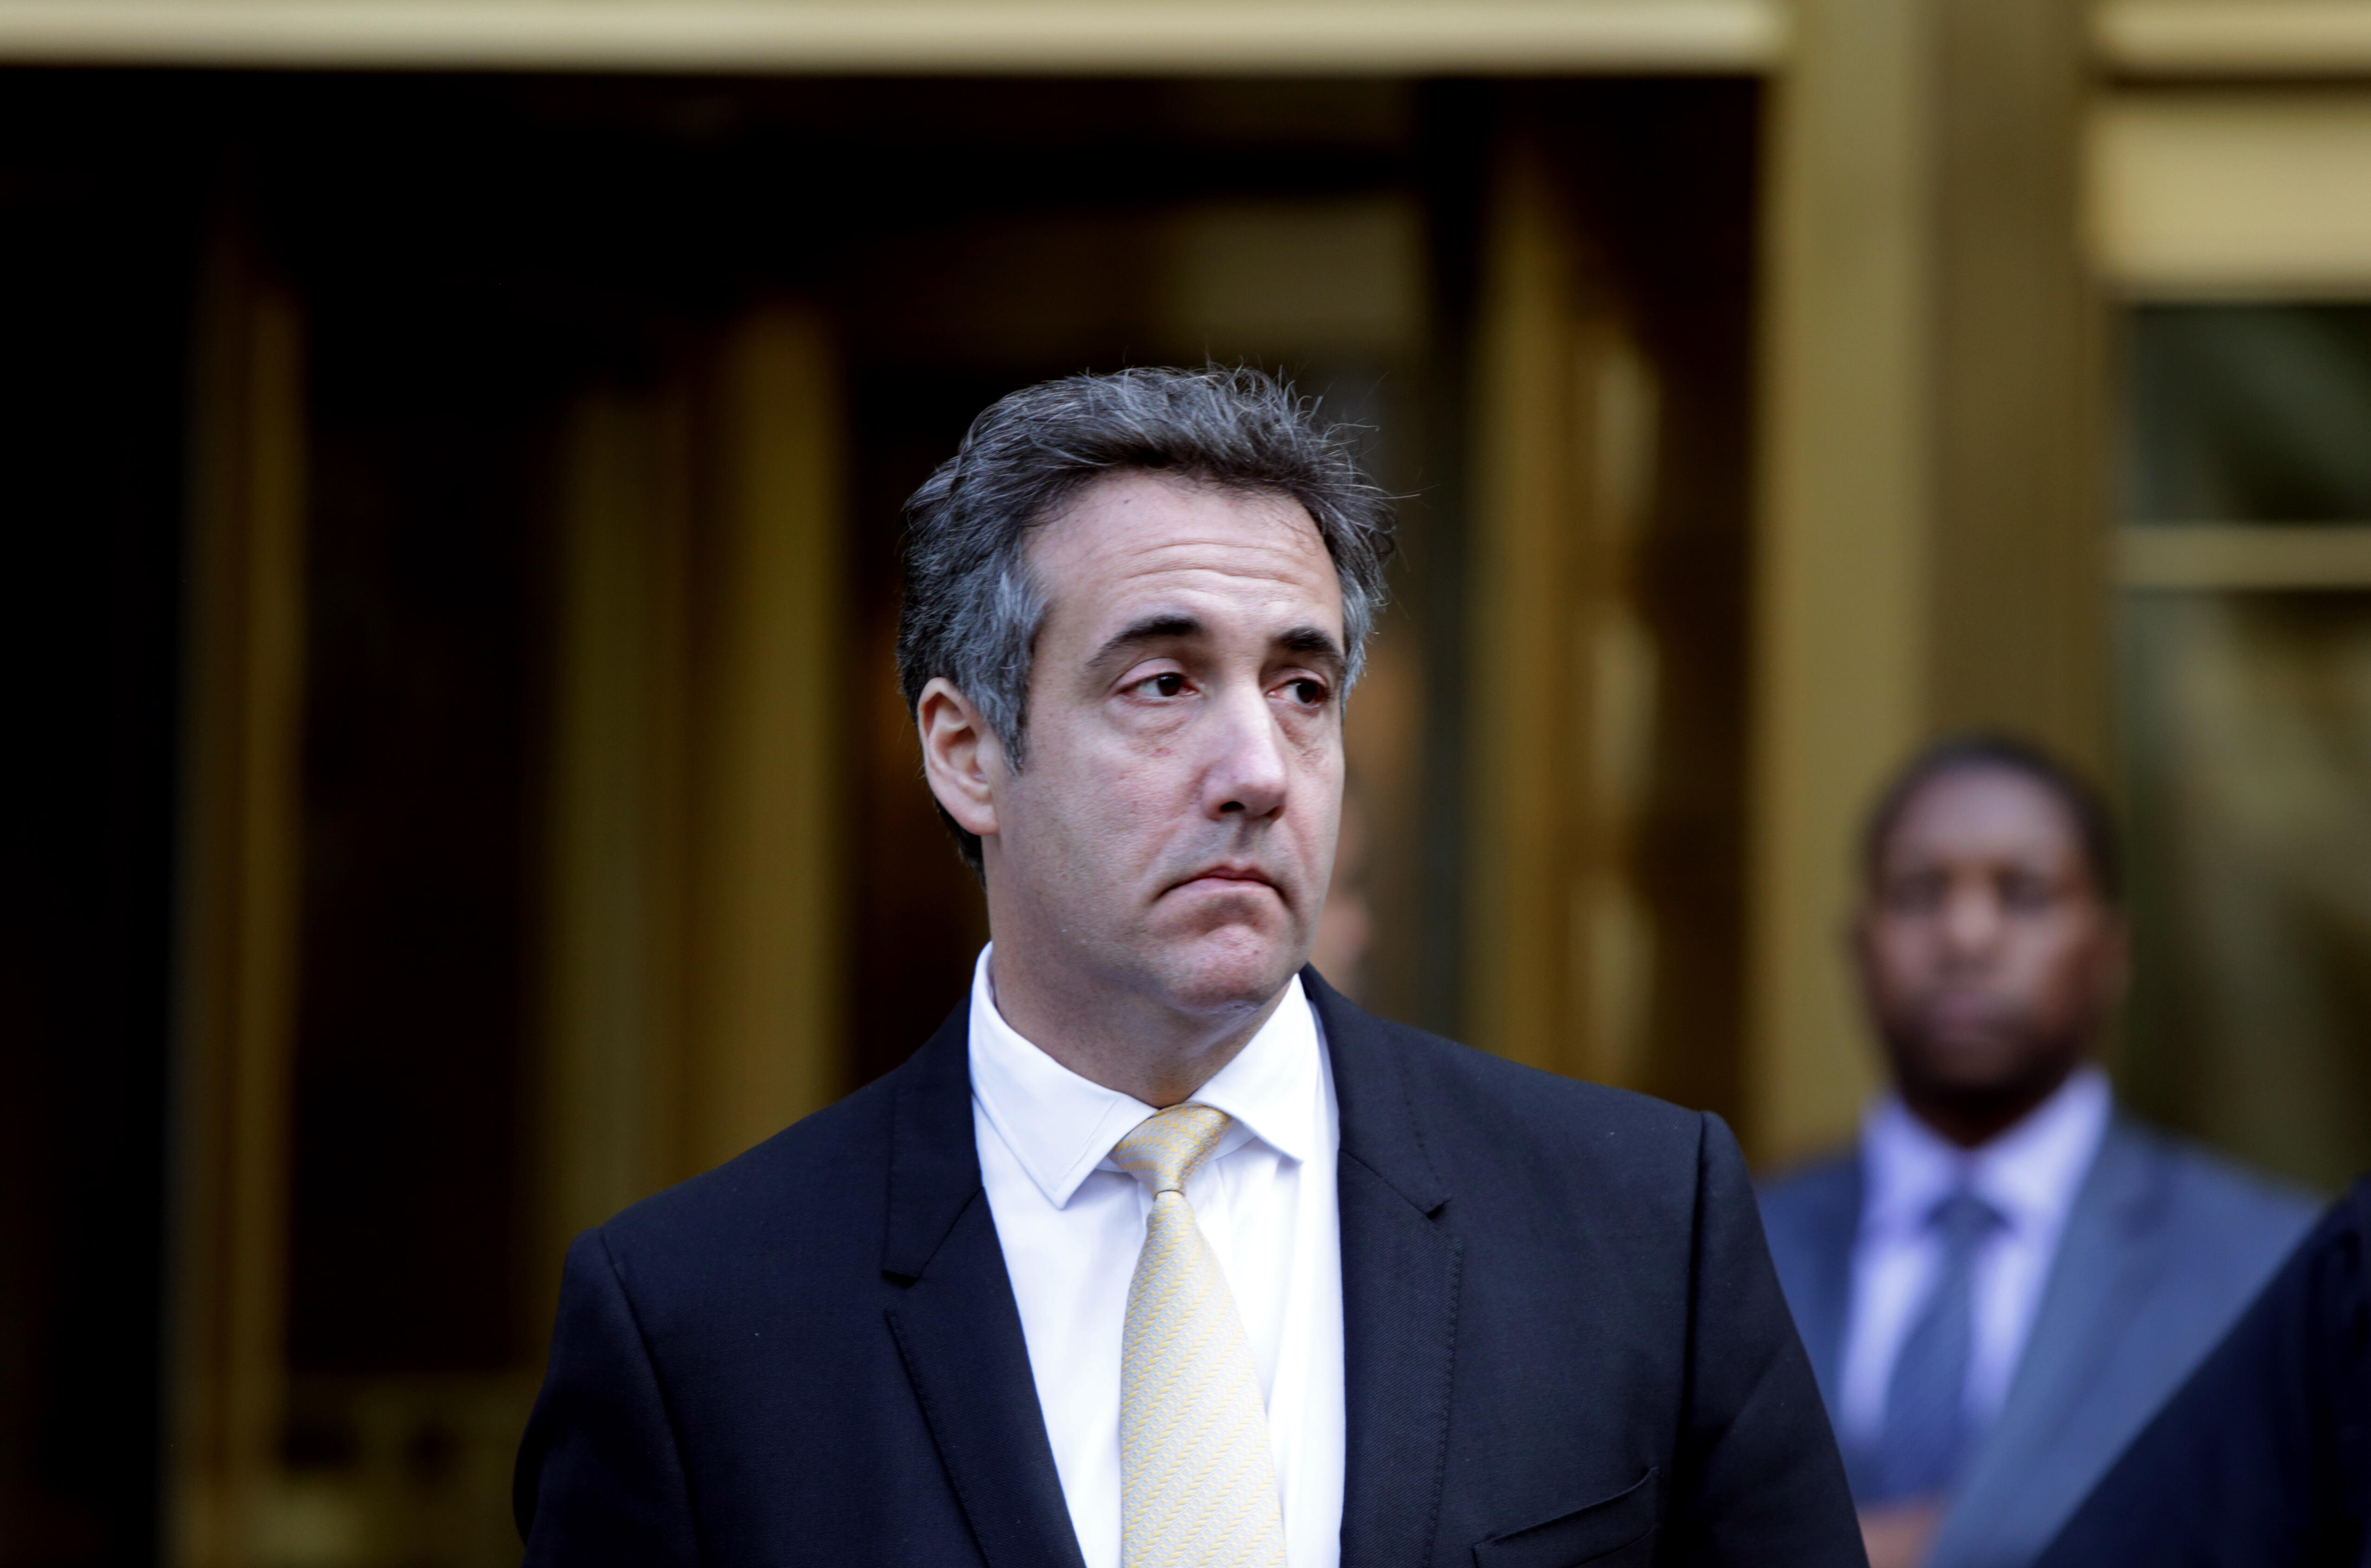 Read Michael Cohen's Opening Statement to Congress - Thumbnail Image